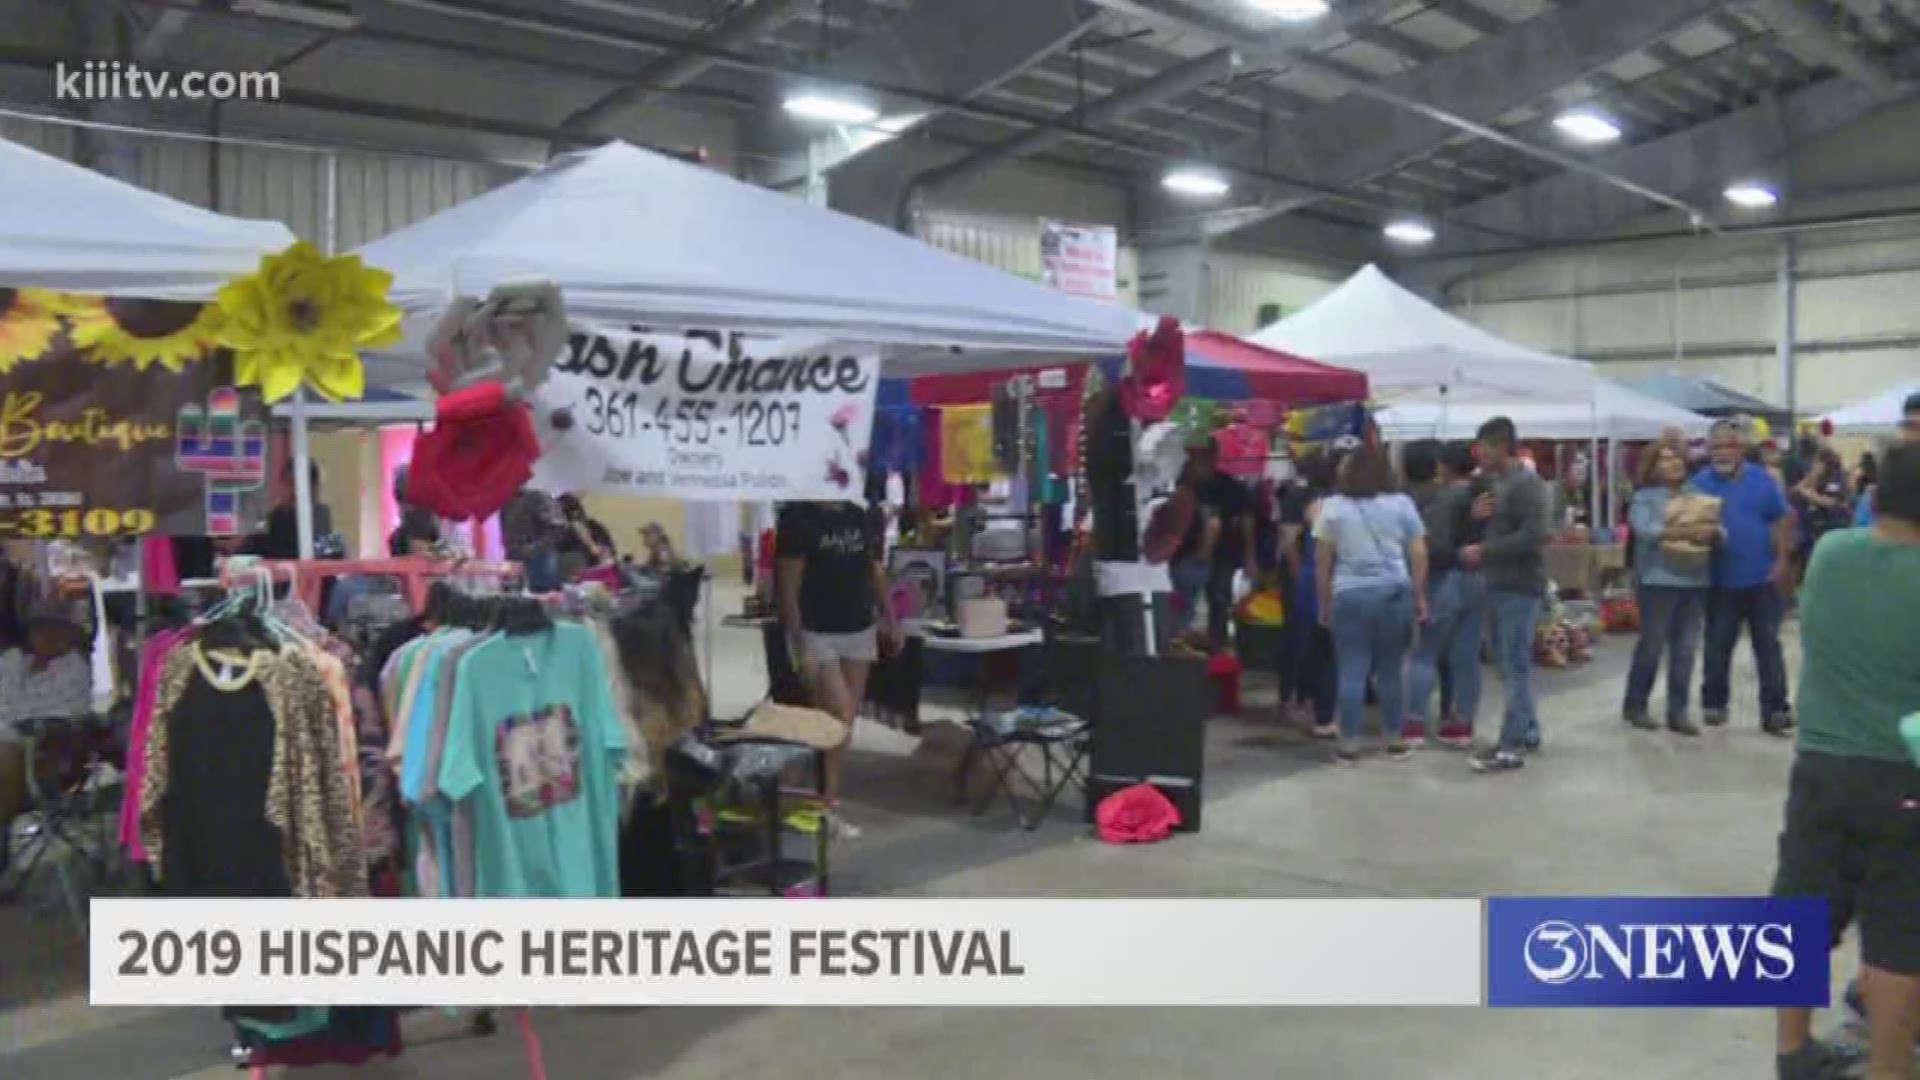 The Hispanic heritage is rich in the Coastal Bend area and it is important to recognize the legacy of our ancestors.